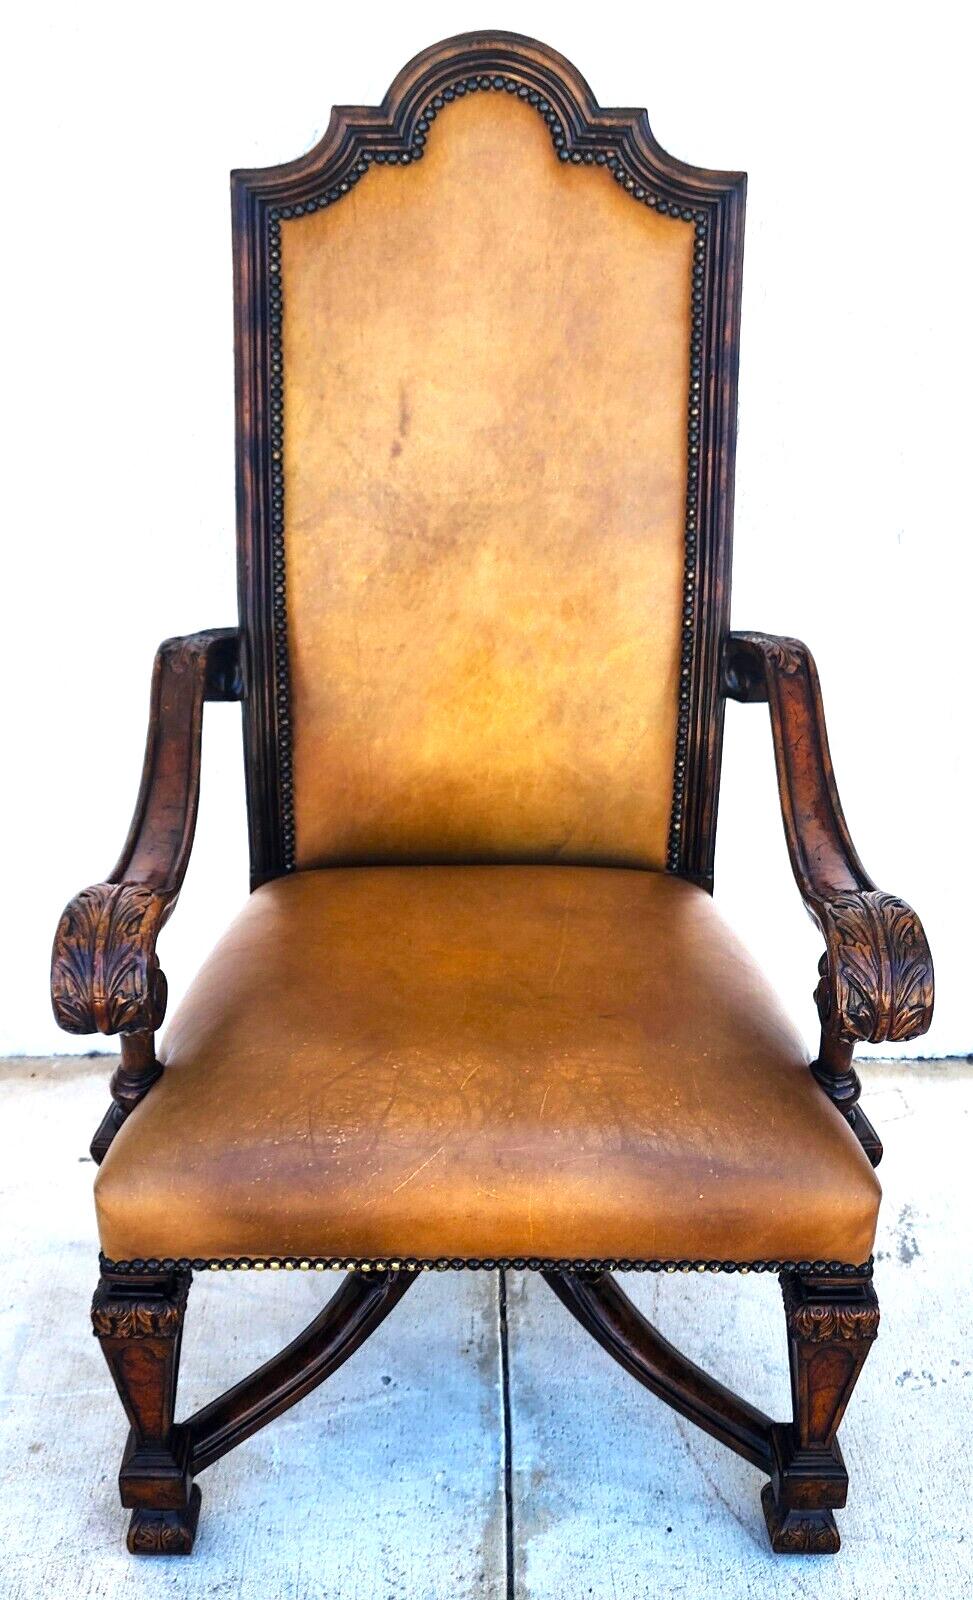 For FULL item description click on CONTINUE READING at the bottom of this page.

Offering One Of Our Recent Palm Beach Estate Fine Furniture Acquisitions Of A 
Leather Throne Armchair by THEODORE ALEXANDER
Featuring detailed carvings, H stretcher